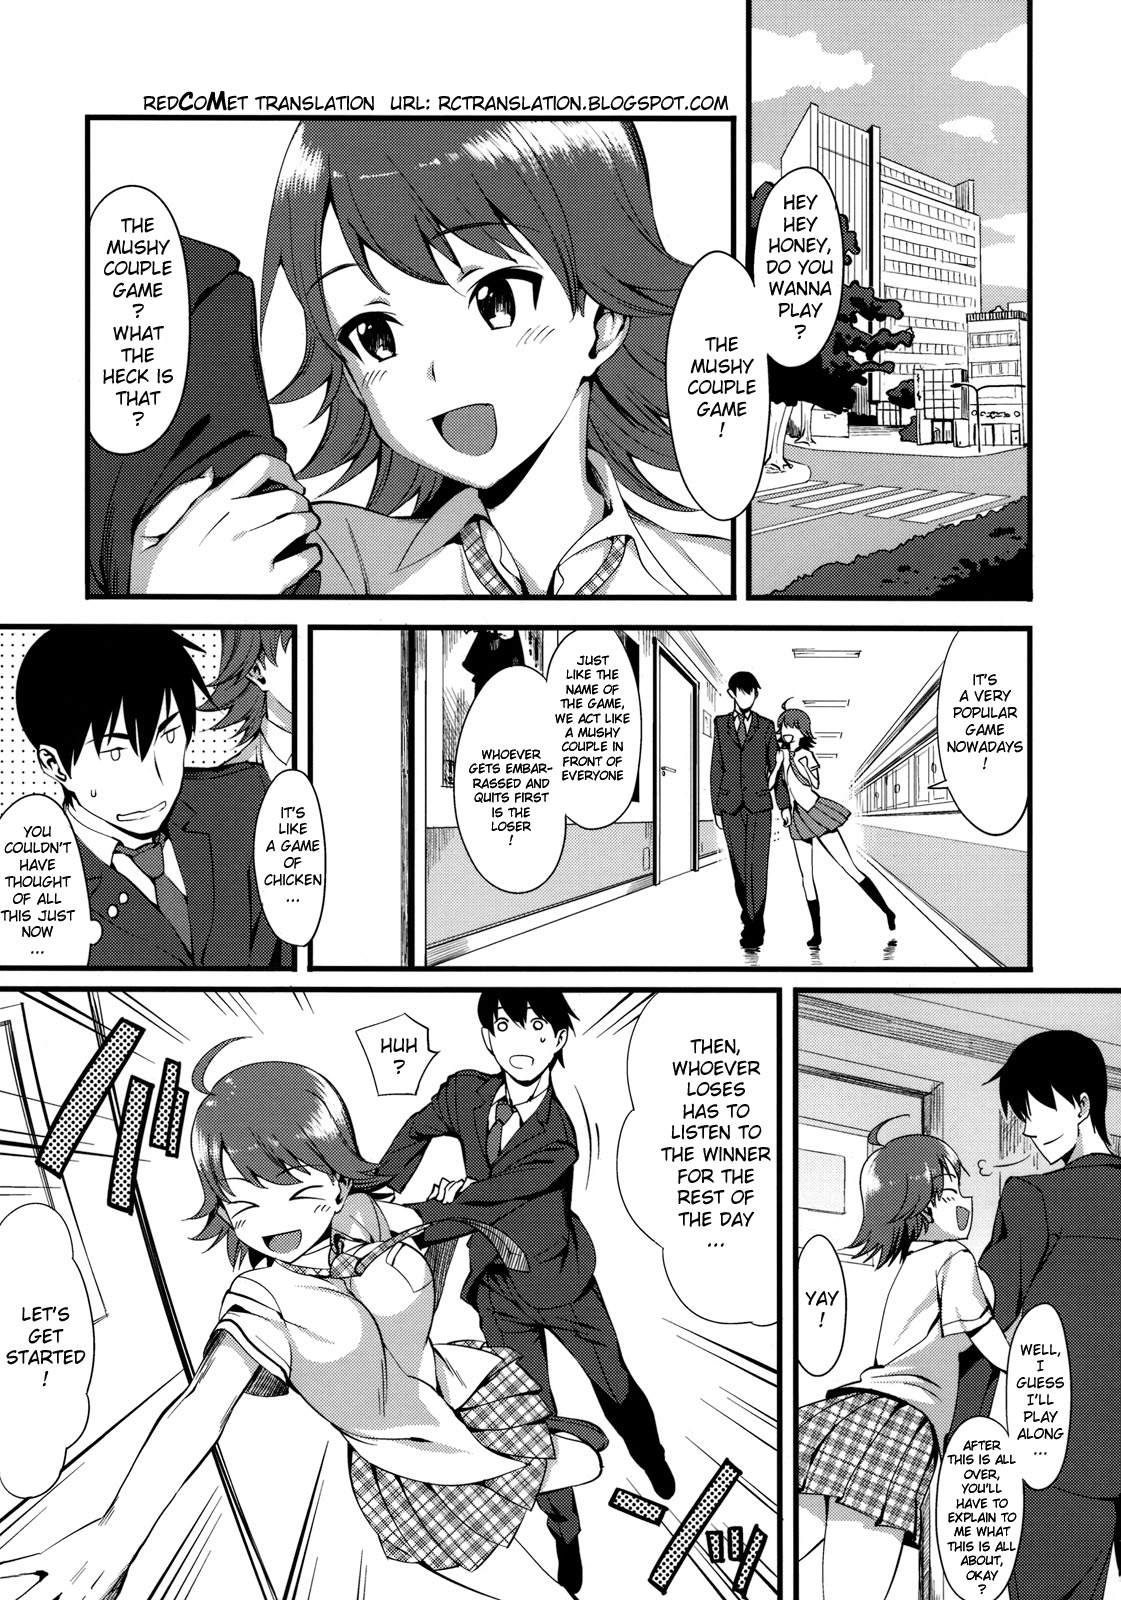 (C76) [TNC. (Lunch)] THE BEAST AND... (THE iDOLM@STER) [English] [redCoMet] page 5 full